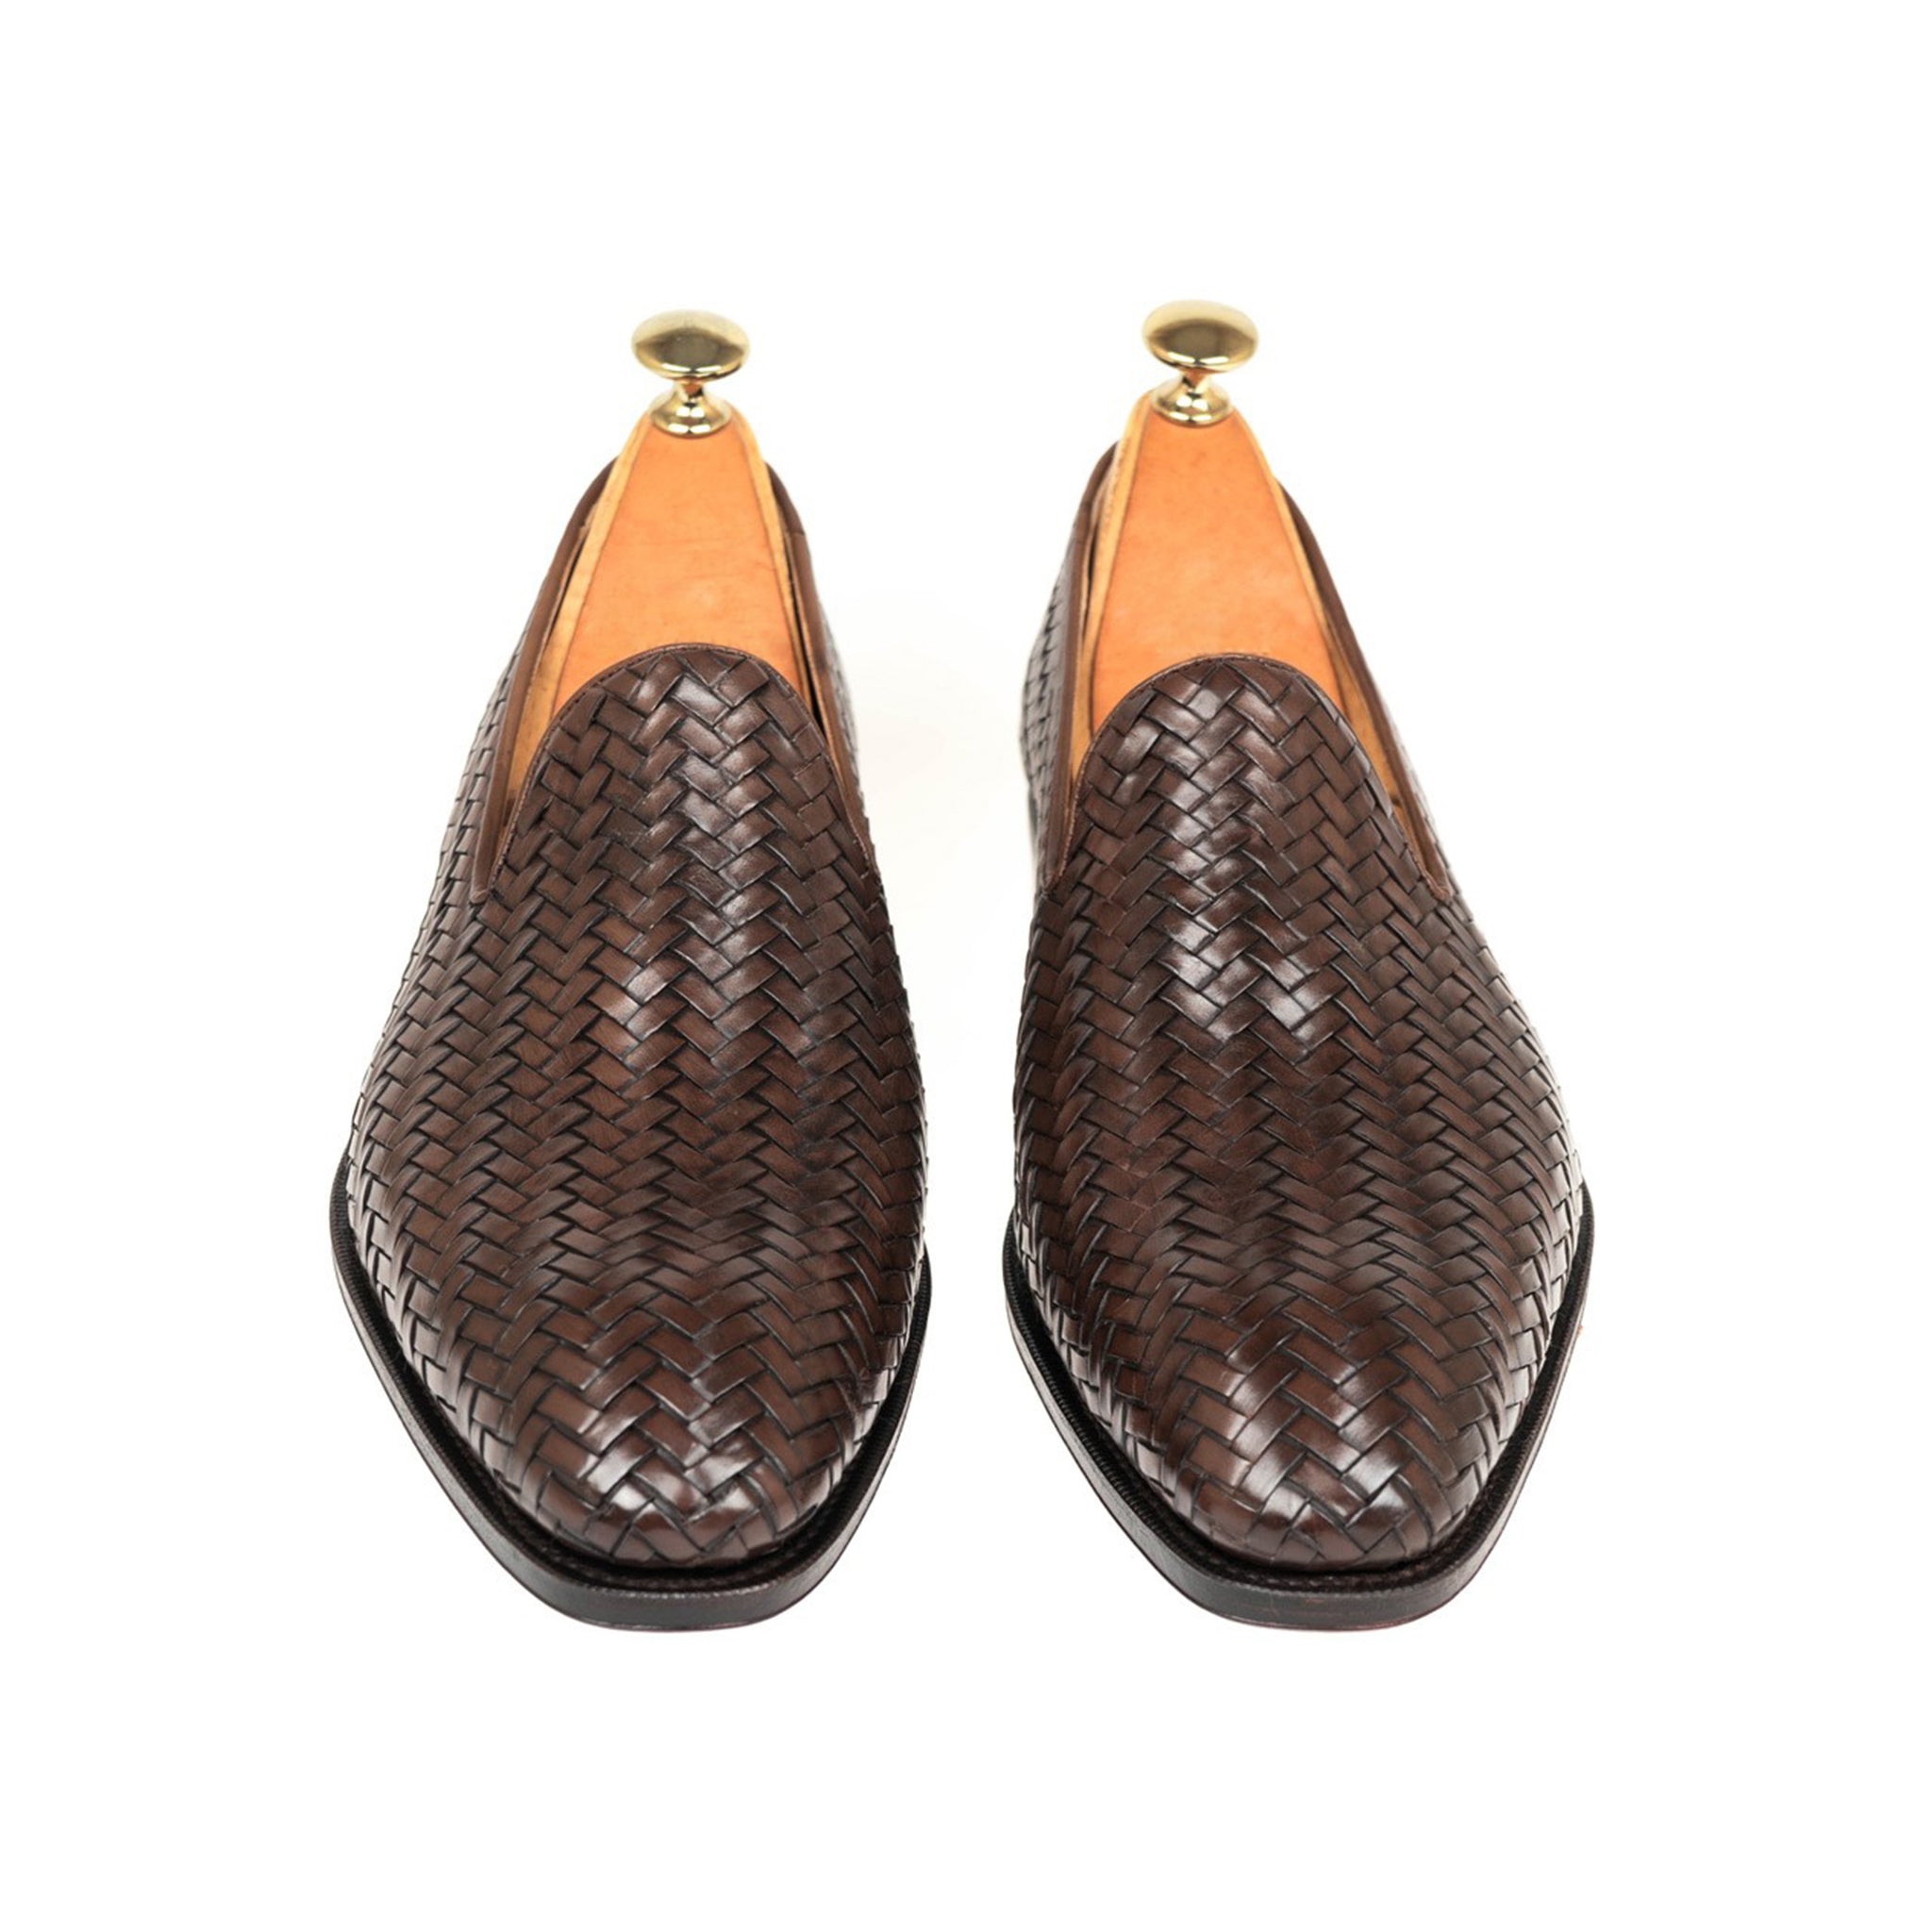 Cocoa Braided Italian Leather Loafers